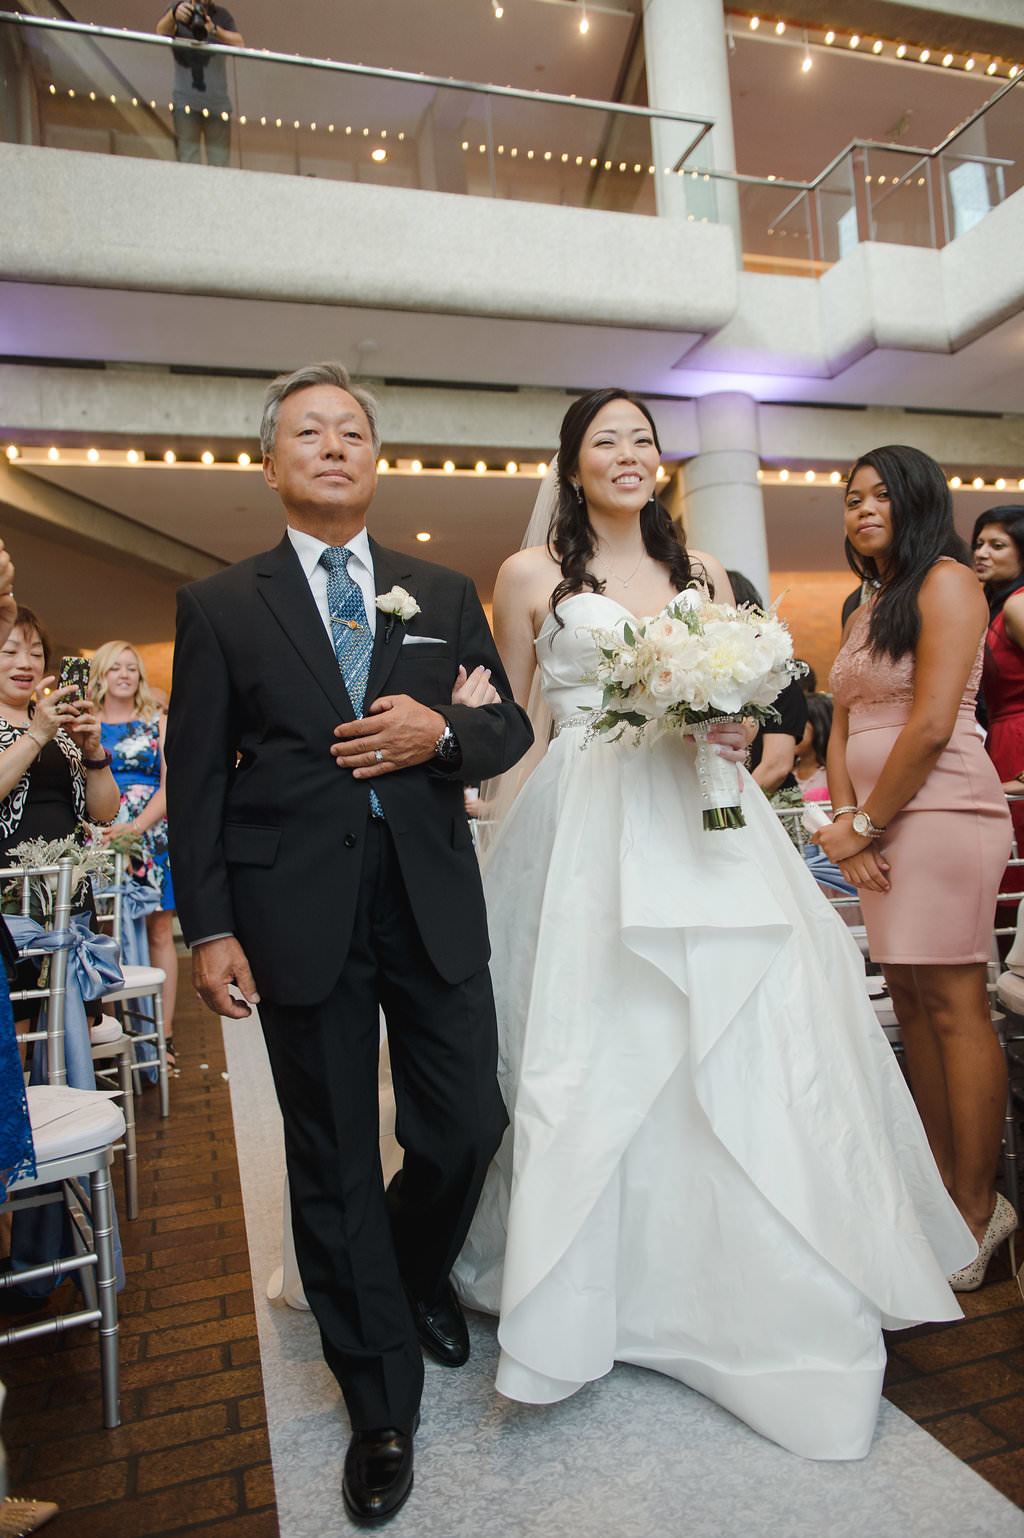 Bride Walking Down the Aisle with Father, Bride in Strapless Sweetheart Ballgown Wedding Dress, White and Greenery Floral Bouquet | Tampa Bay Photographer Marc Edwards Photography | Tampa Venue Straz Center